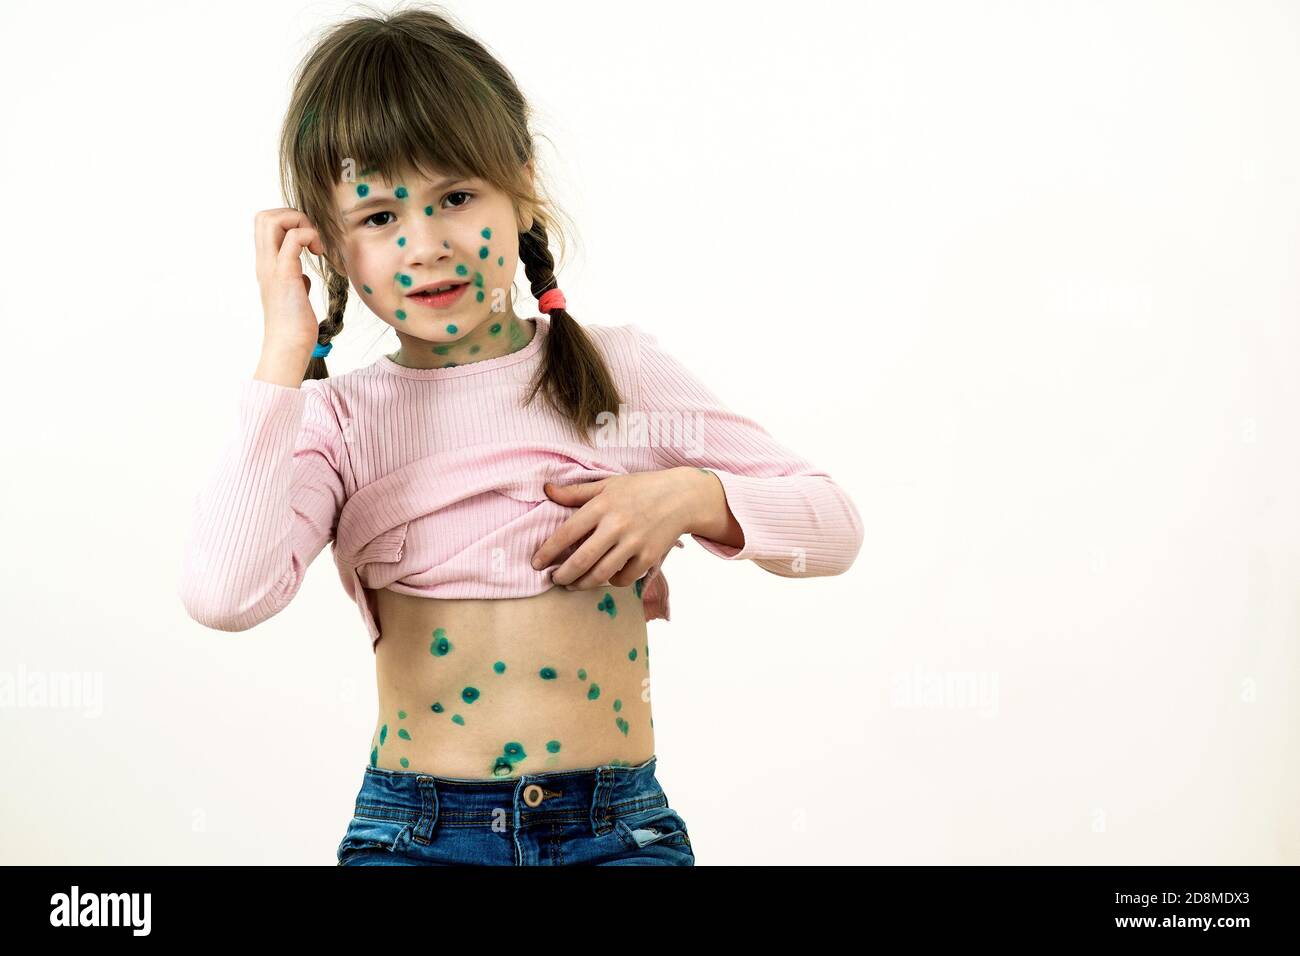 Child girl covered with green rashes on face and stomach ill with chickenpox, measles or rubella virus. Stock Photo